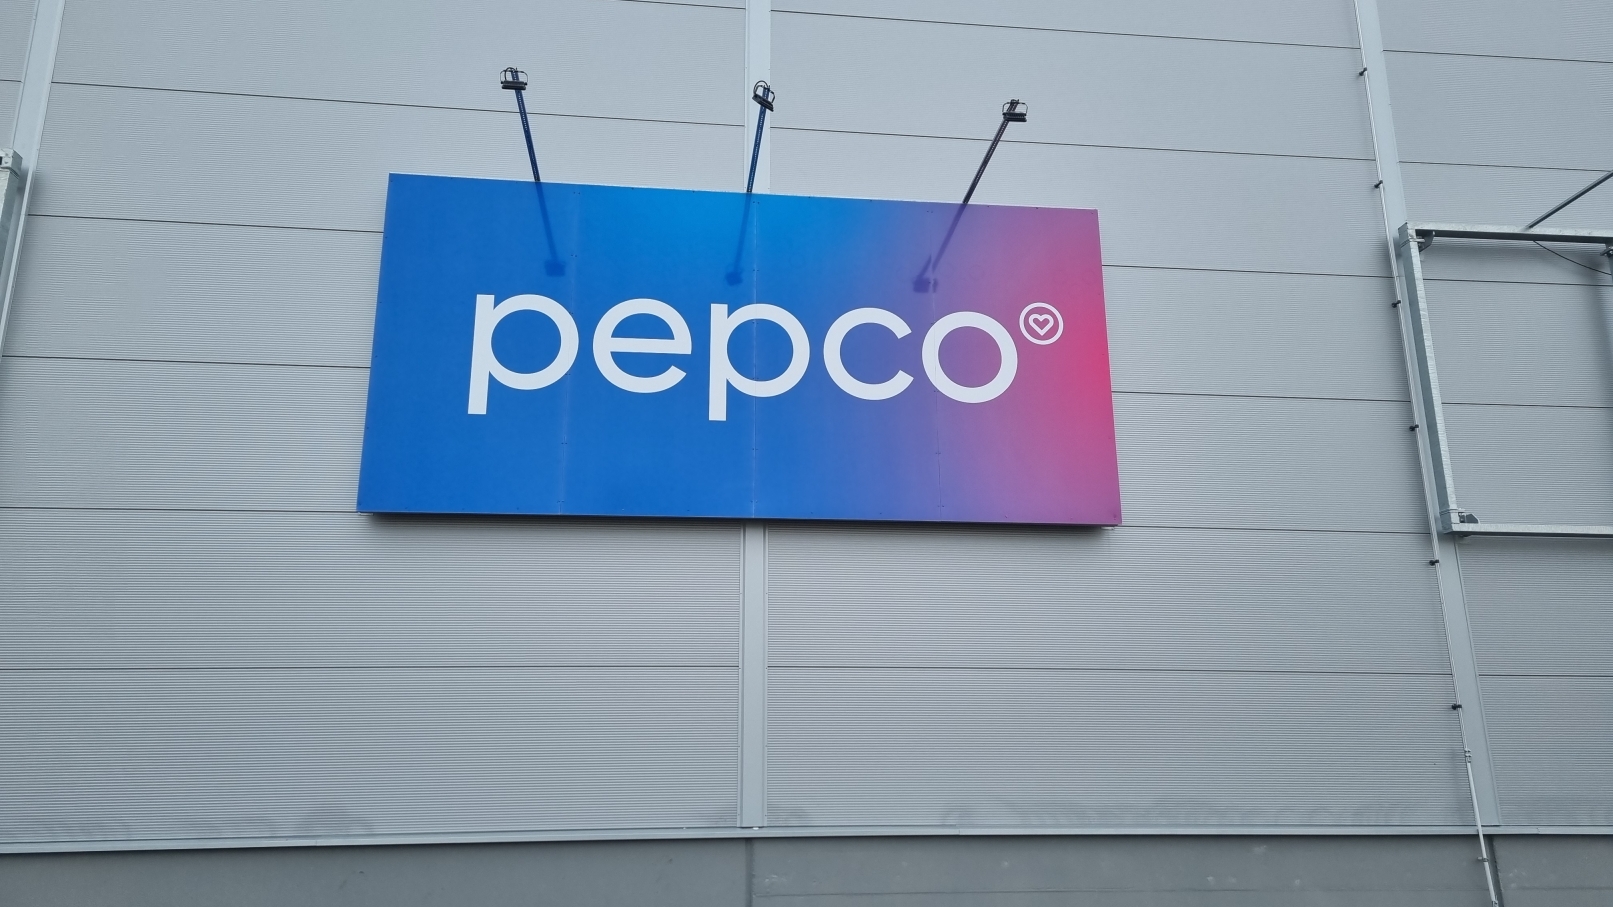 advertising panel with halogen backlight - PEPCO shop